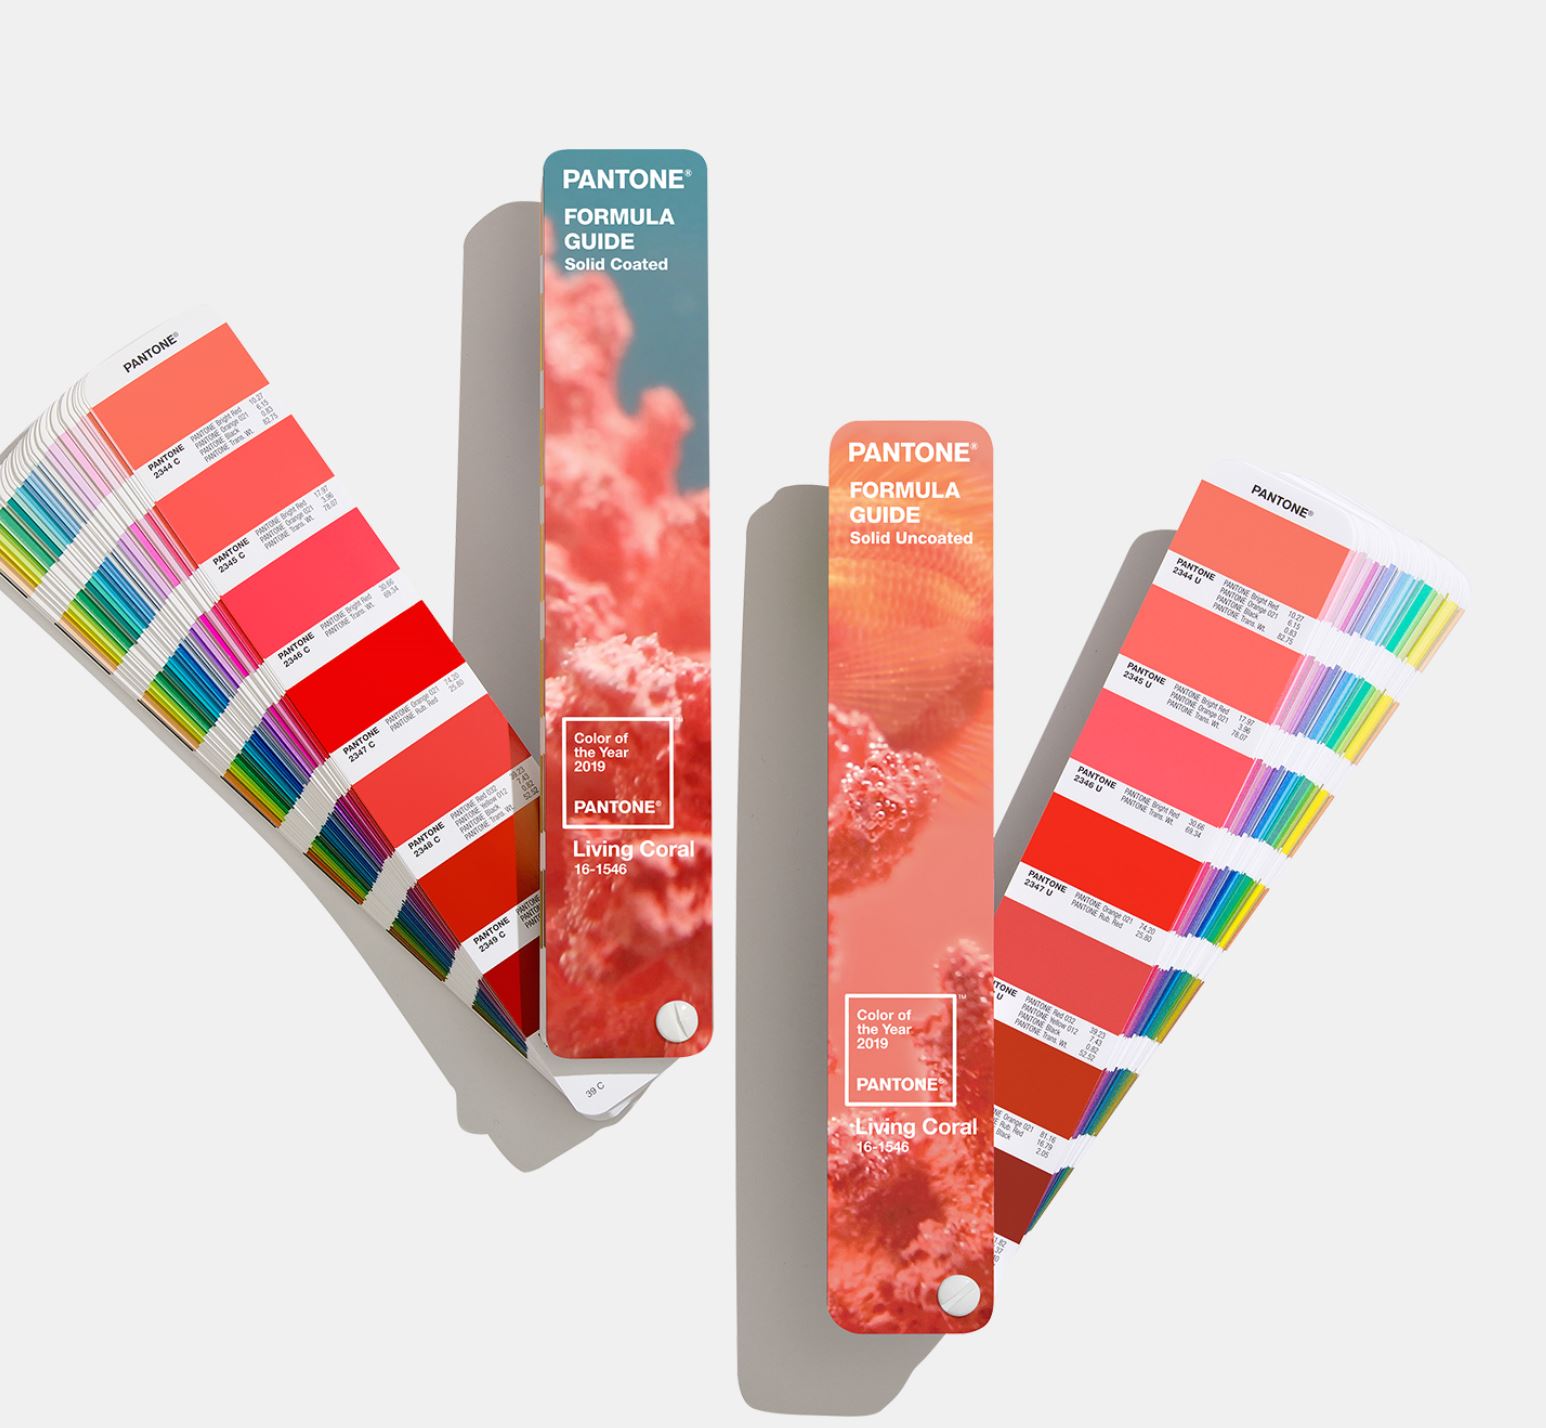 Formula Guide, Limited Edition Pantone Color of the Year 2019 Living Coral